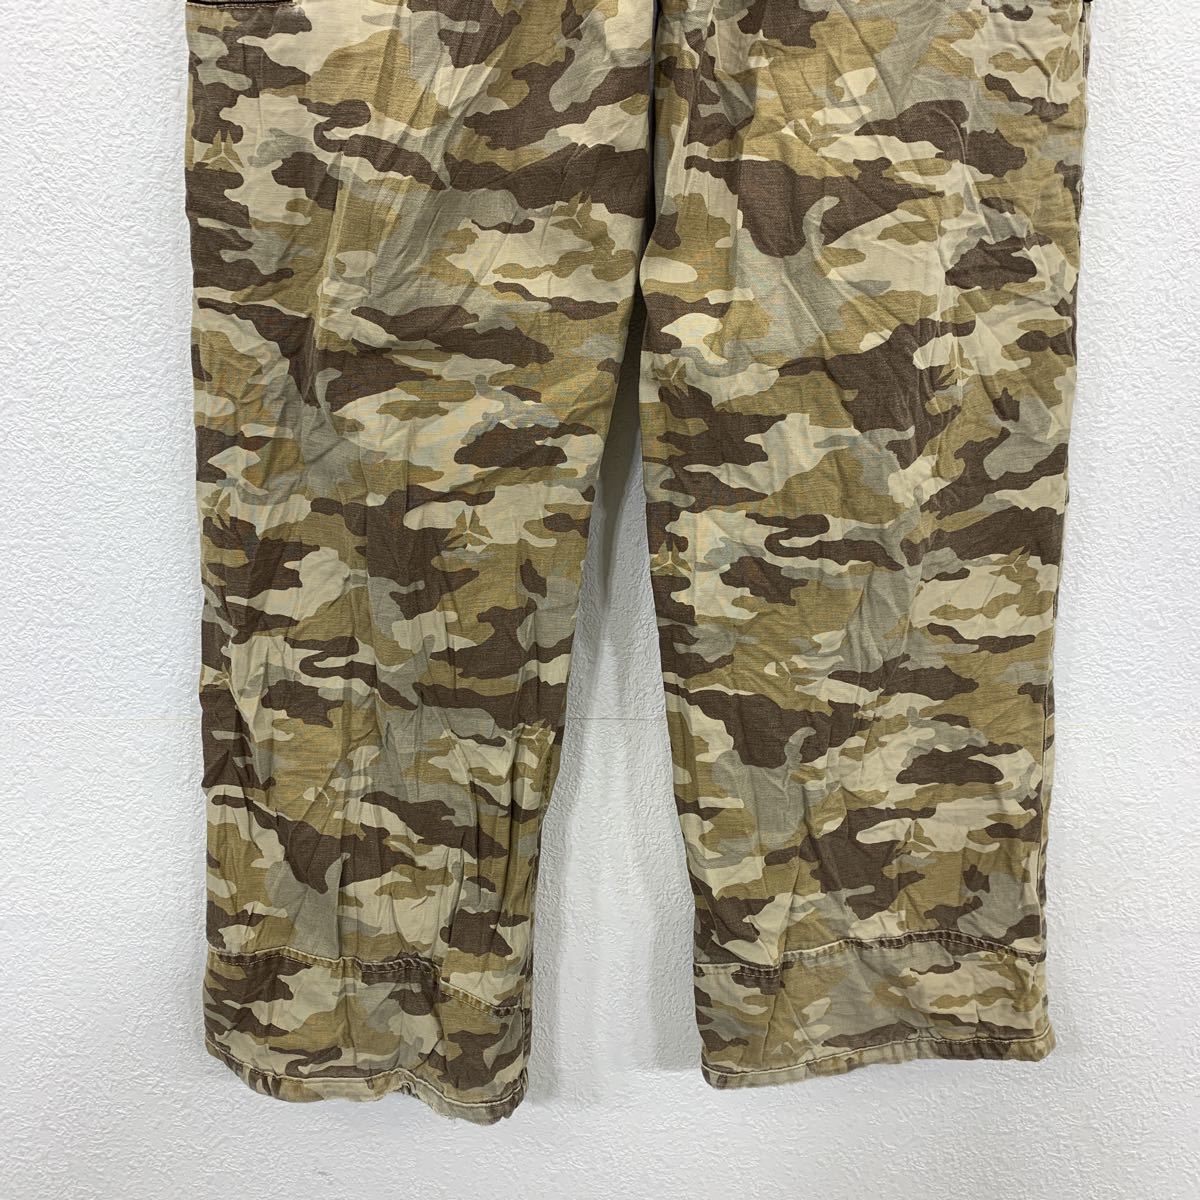 OLDNAVY cargo pants W28 Old Navy camouflage camouflage total pattern old clothes . America buying up 2305-2009